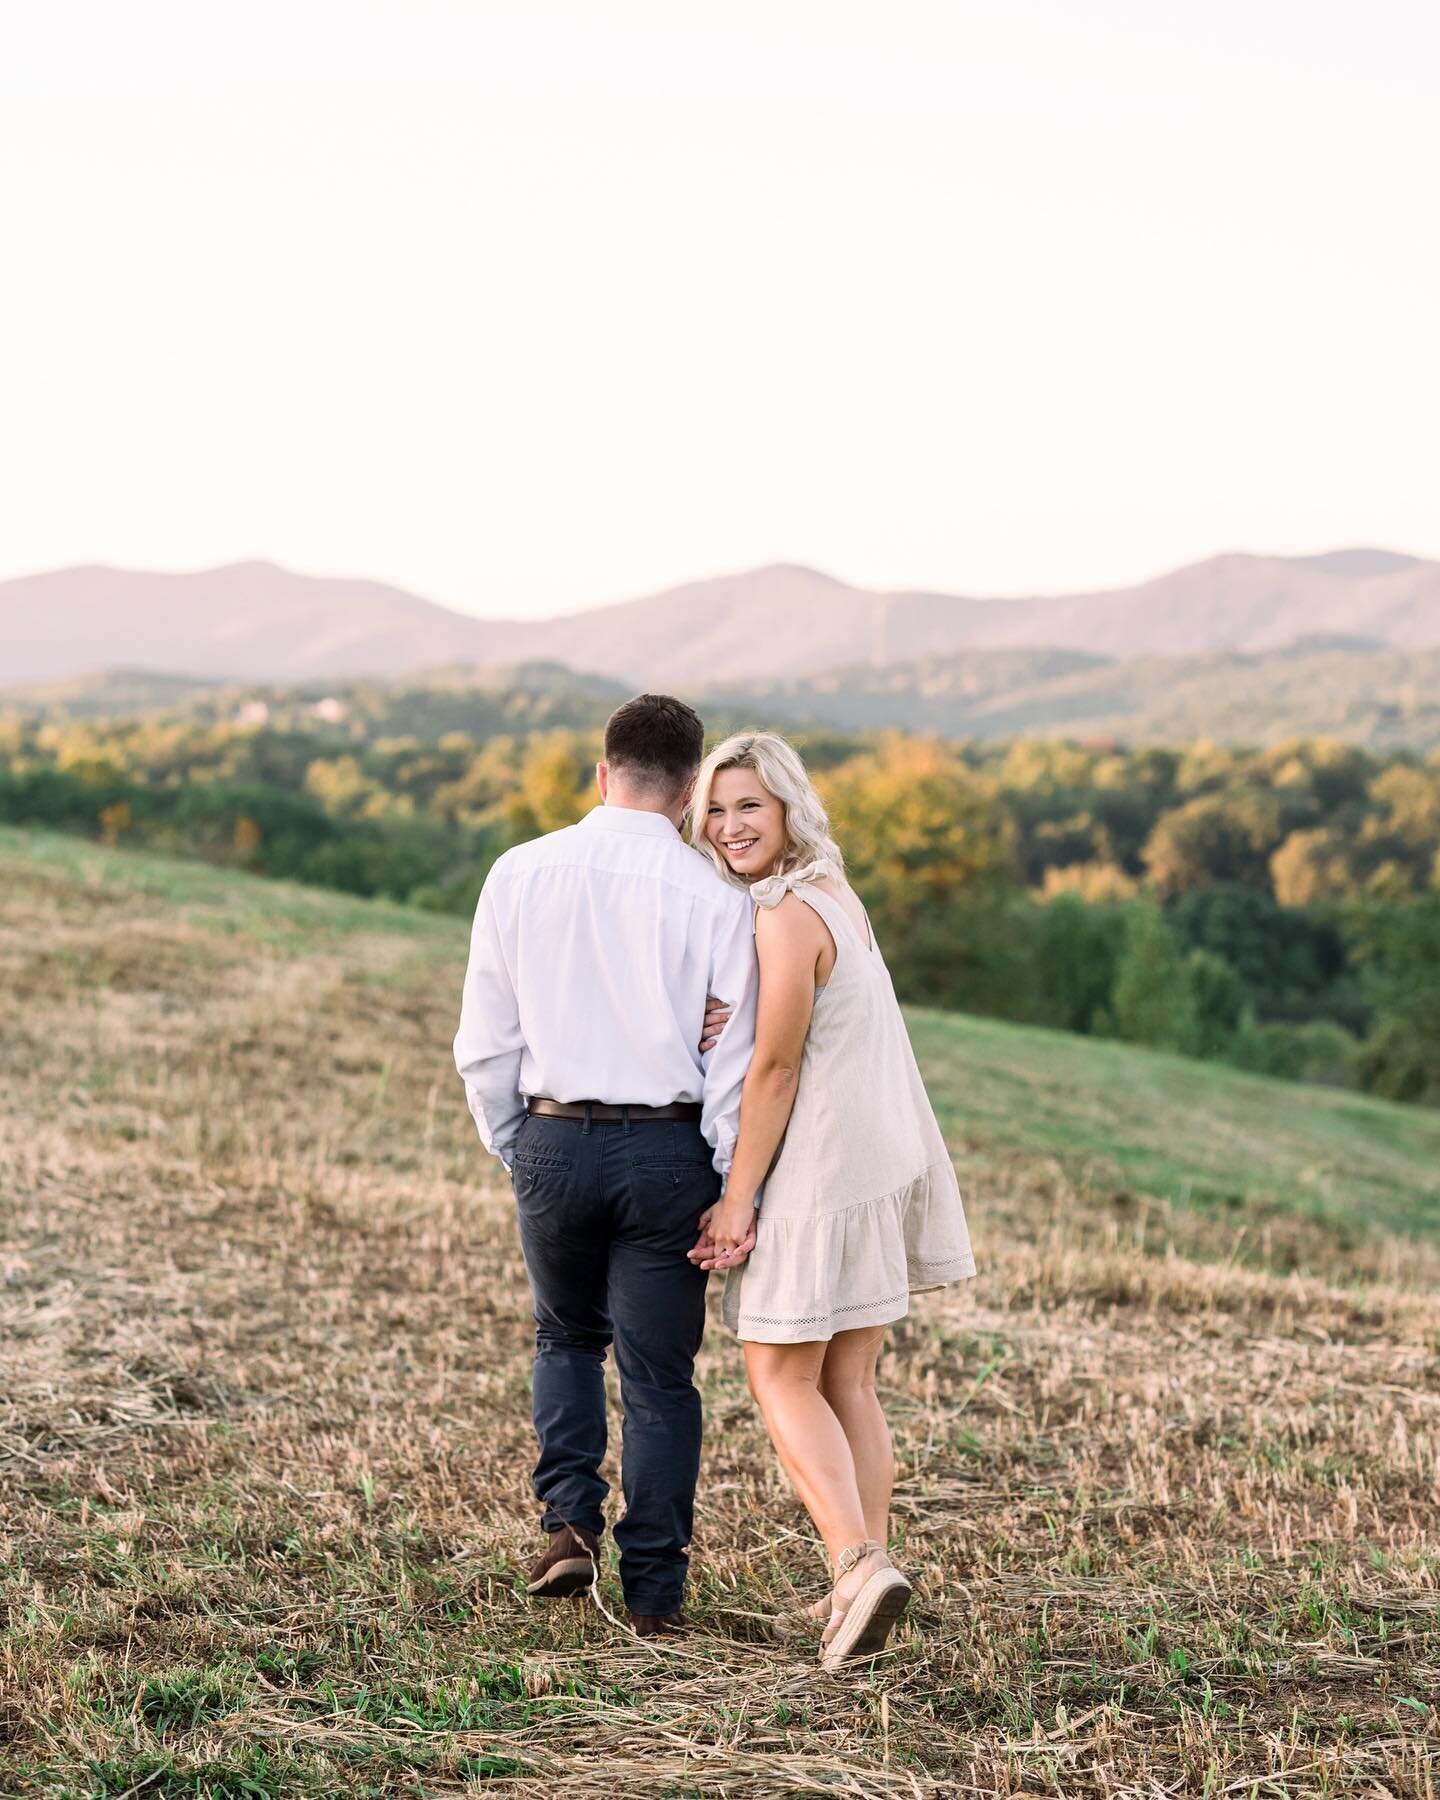 I know these two are enjoying their honeymoon! I cannot wait to show them a few of their wedding photos when they get home! 😍
⠀⠀⠀⠀⠀⠀⠀⠀⠀
#lisashayphotography